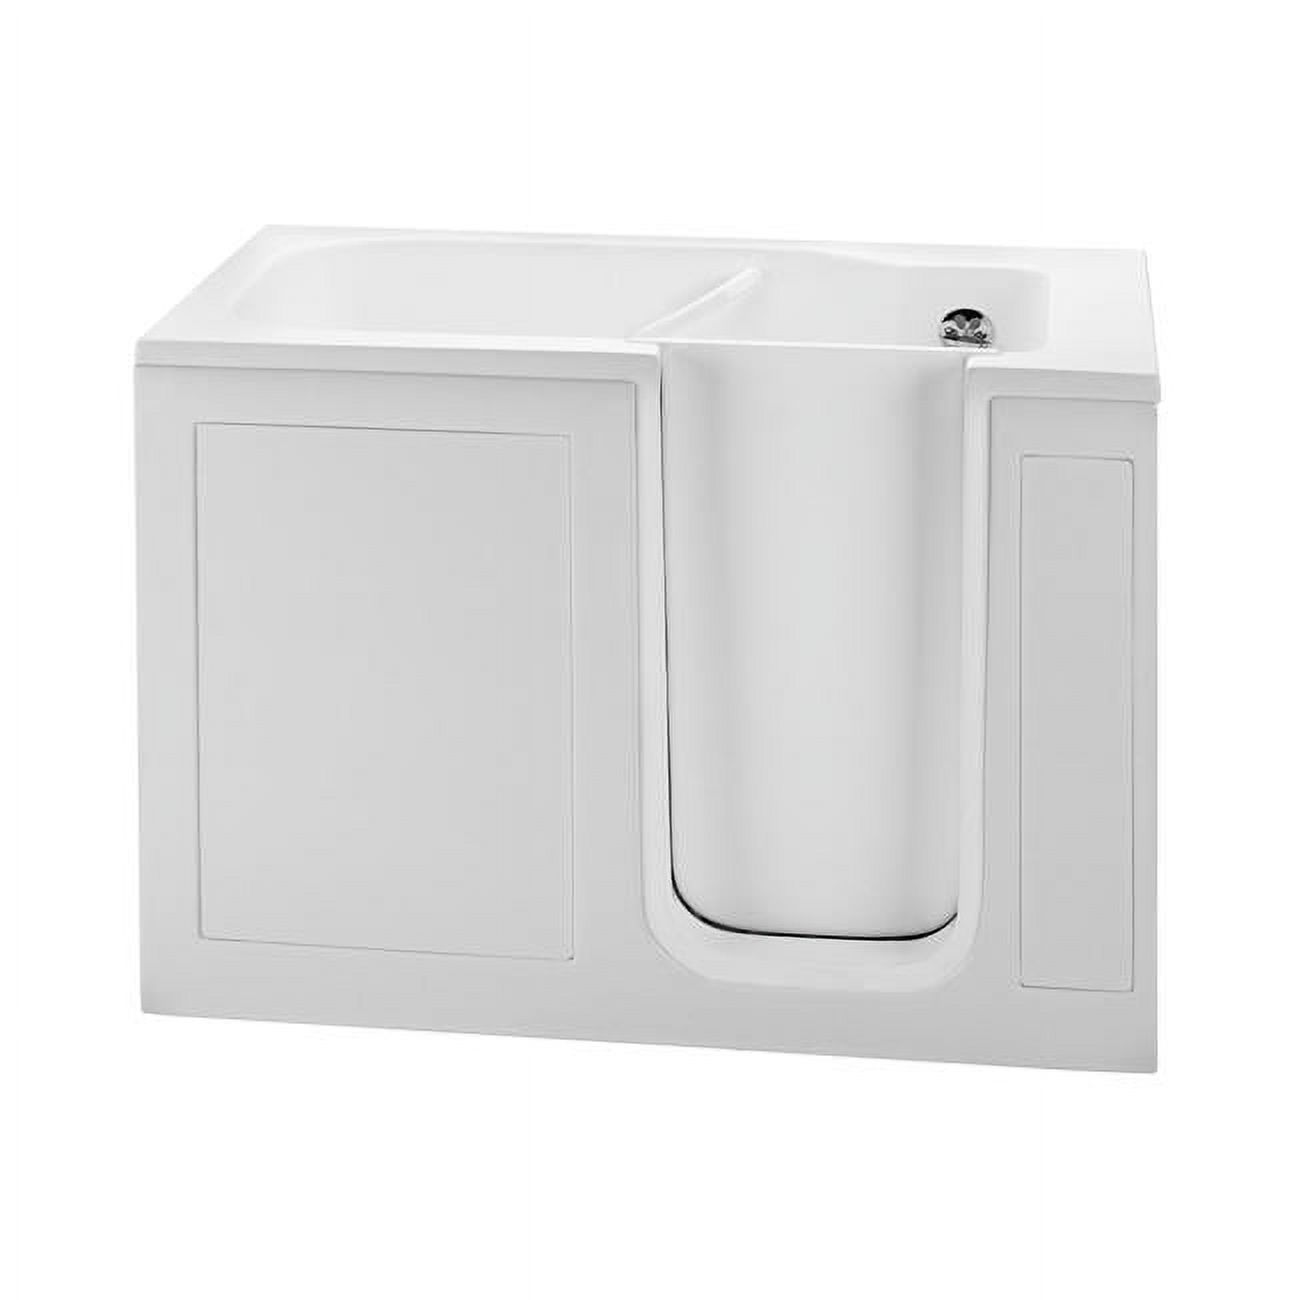 Walk in Air Bath with Valves, Biscuit - 51.5 x 30.25 x 37.5 in. - image 1 of 1